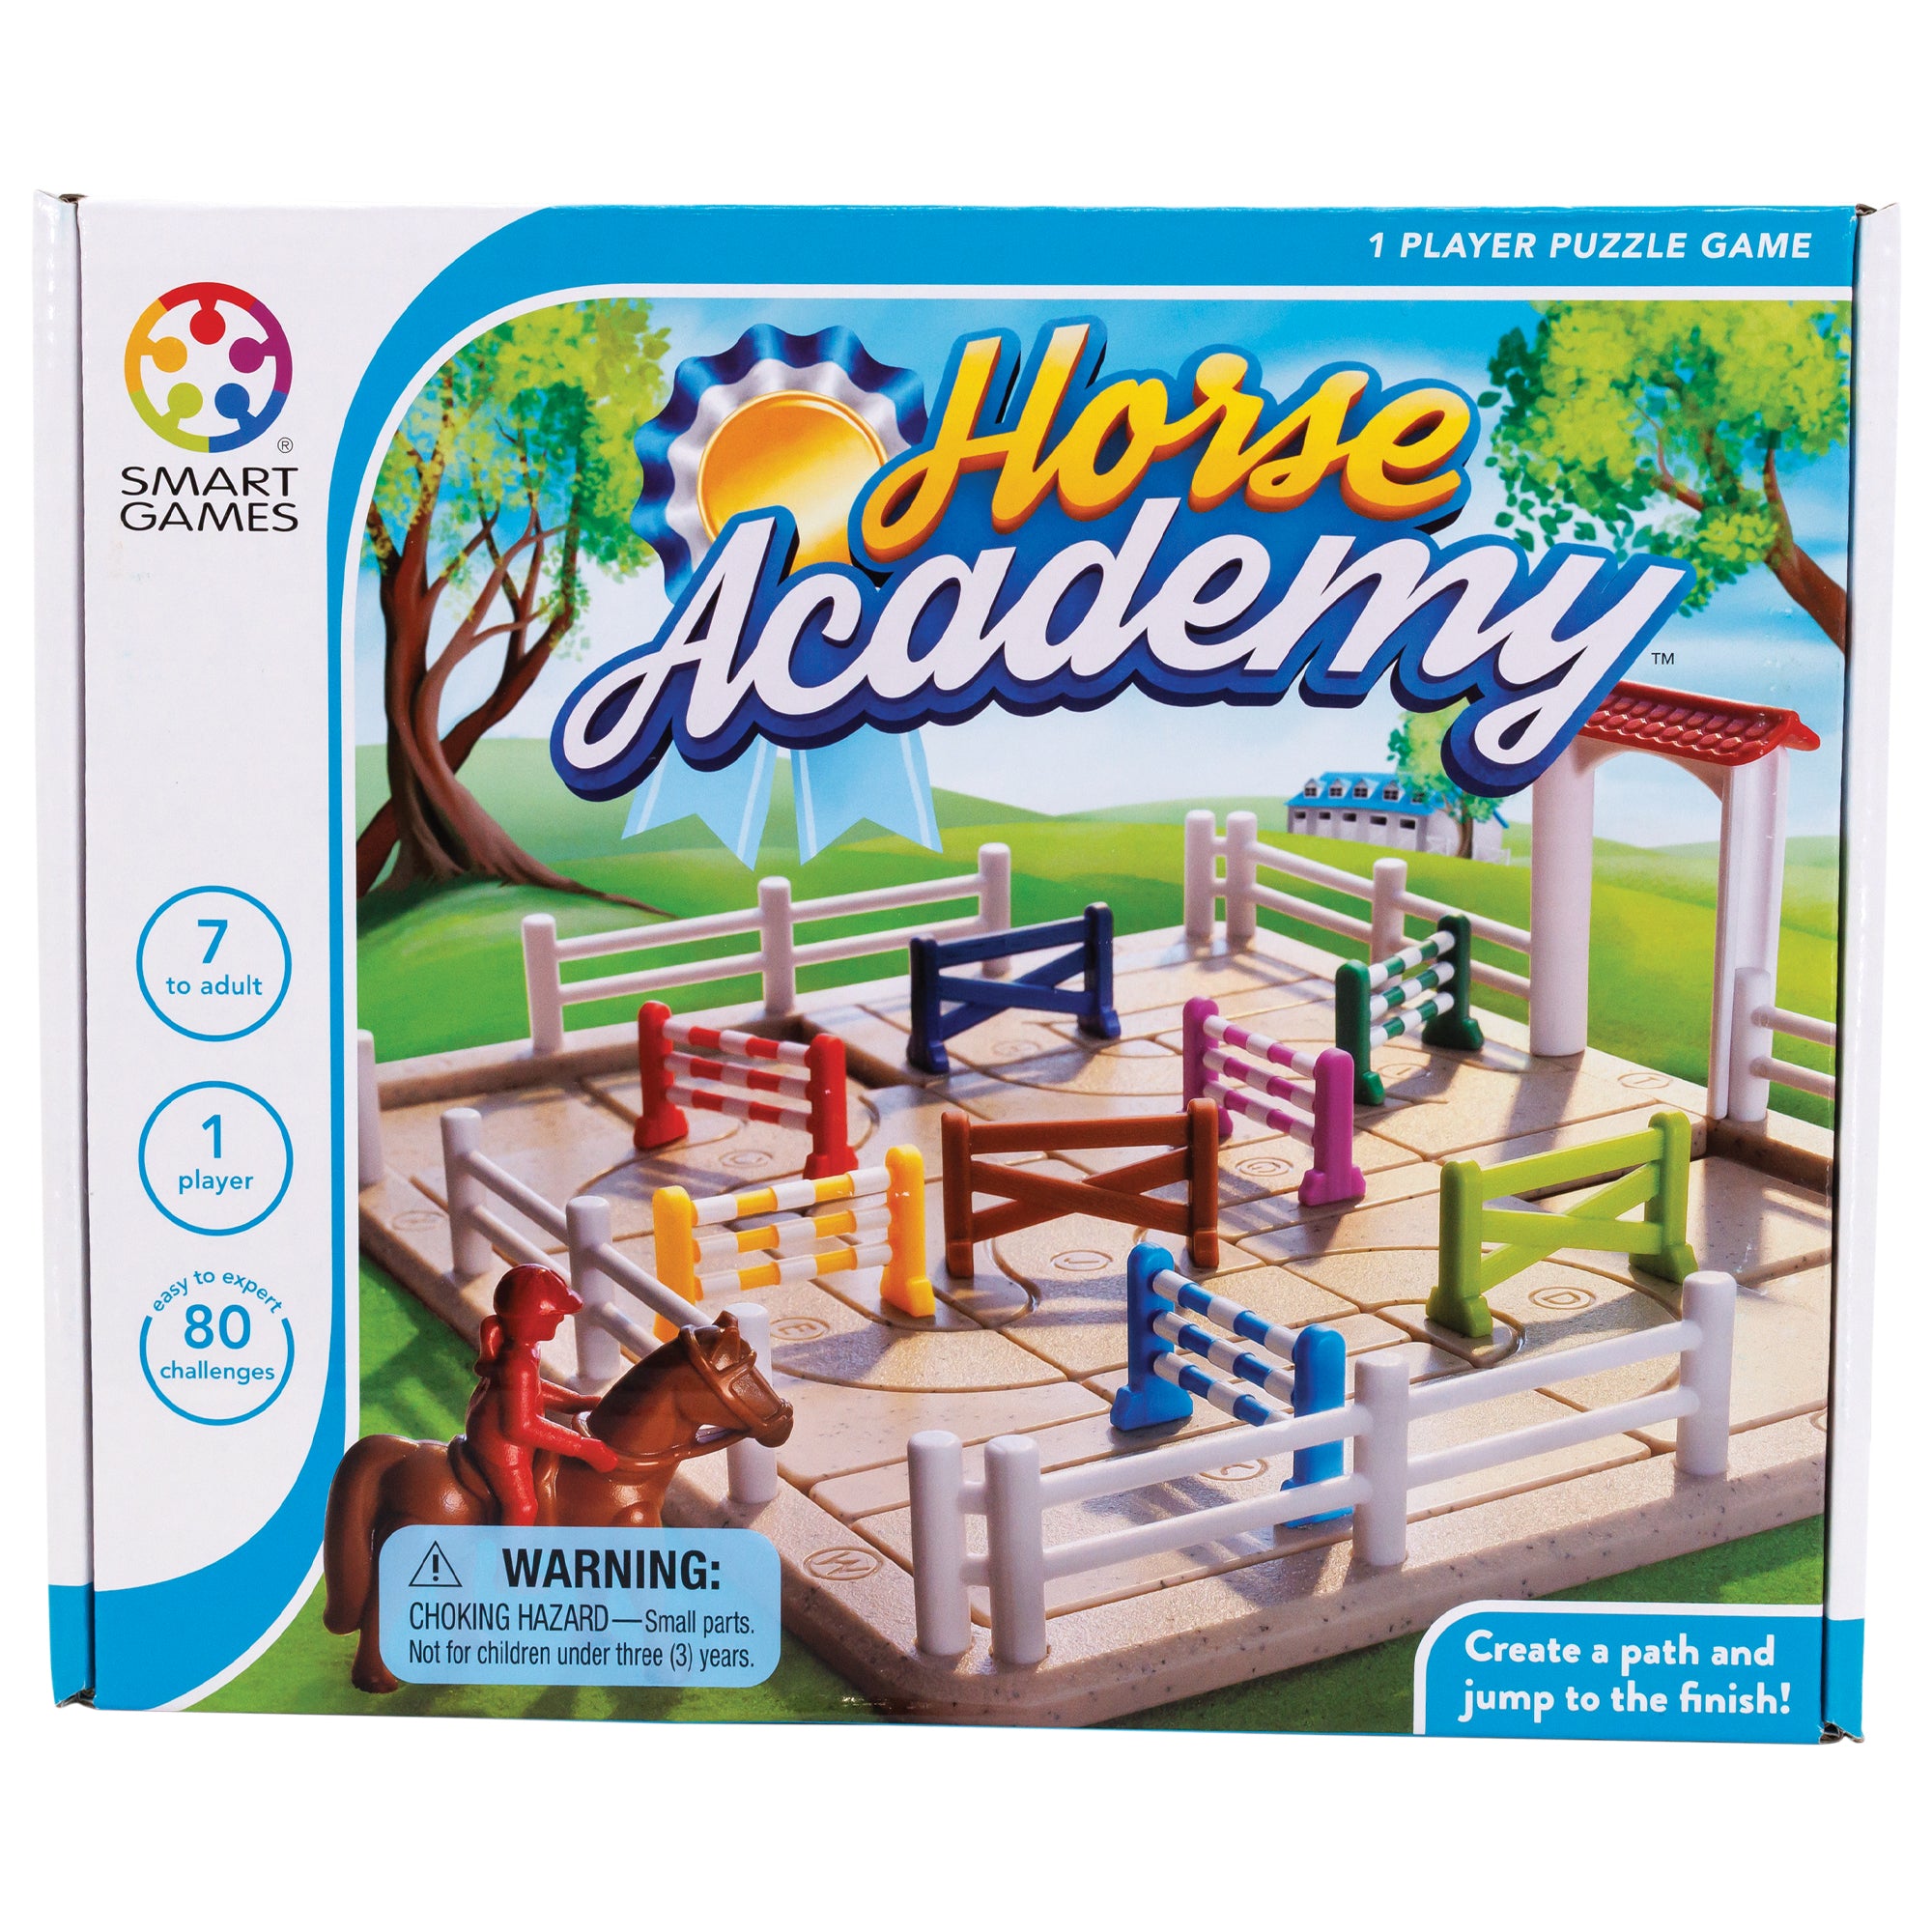 The Horse Academy game box. The box cover shows the game in play. The game board is a sand-colored rectangle with white fence pieces around the edges. There a several jumping fence pieces in many colors on the game board. Off to the side is a red girl character on top of a horse piece. The background shows trees, grass, and a stable.